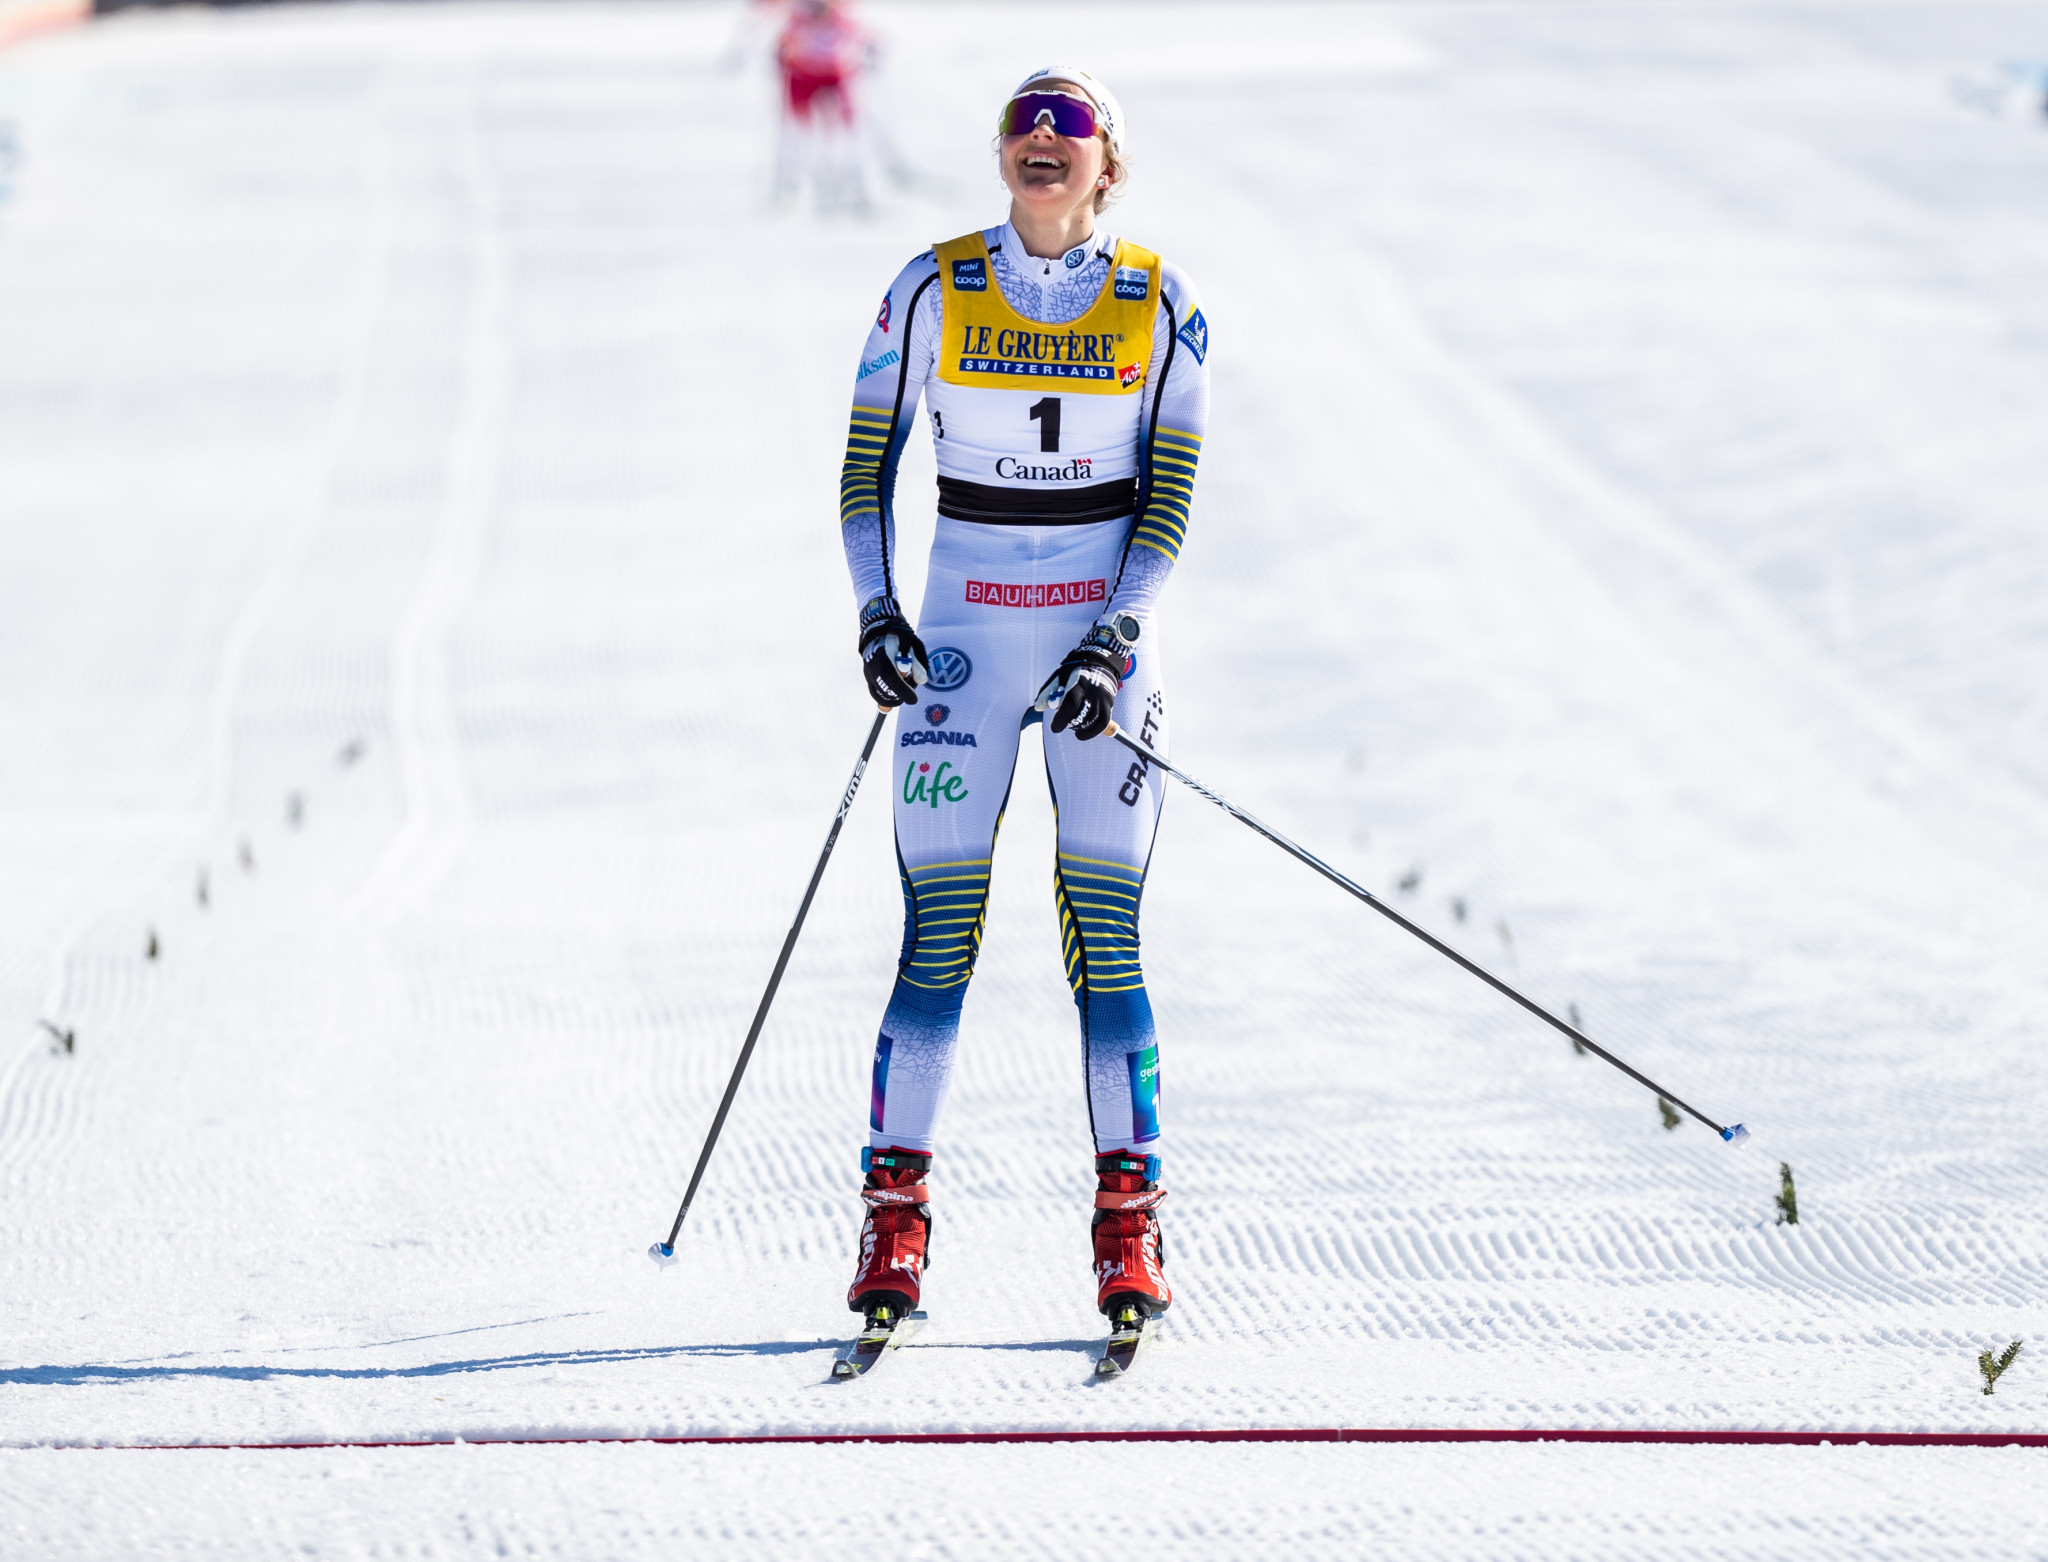 Jean-Marc Chabloz is expected to work closely with Stina Nilsson as she switches from cross-country to biathlon ©Getty Images